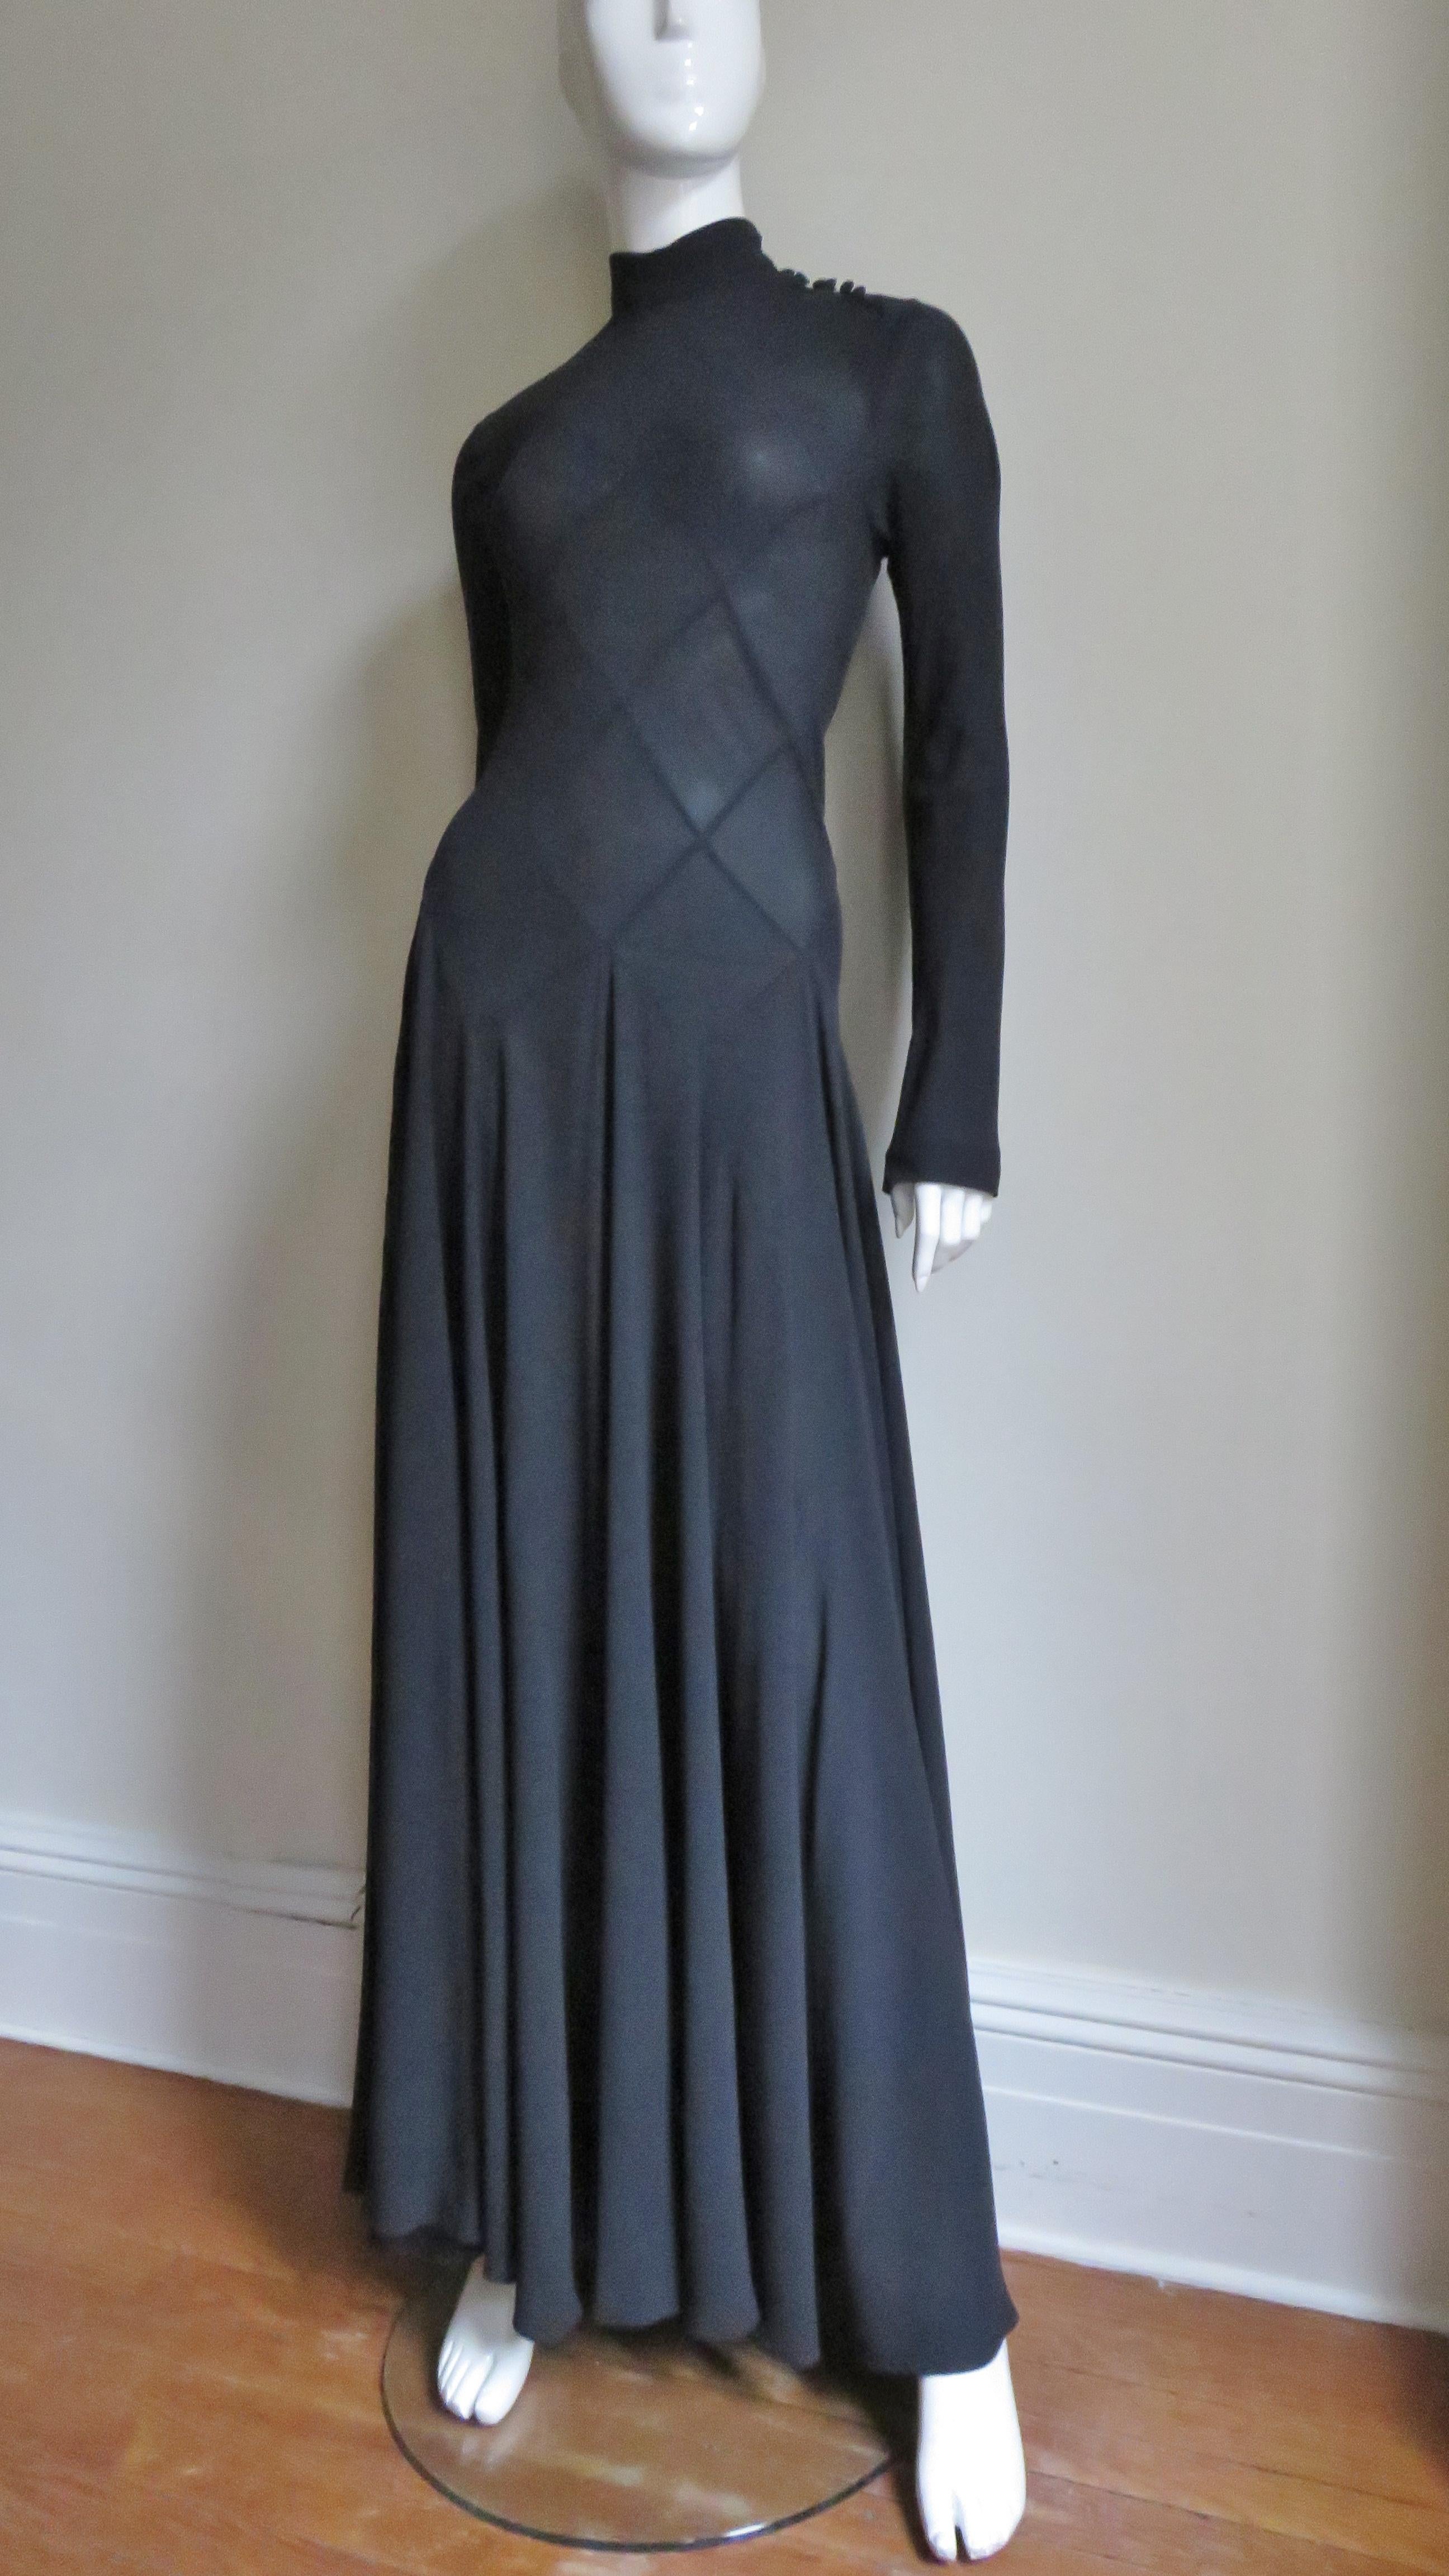 A gorgeous black fine silk dress gown from Calvin Klein. The detail is amazing in the intricate assembling of diamond shapes forming the bodice through to the hips. It has a stand up collar with small self covered buttons along one side of the neck